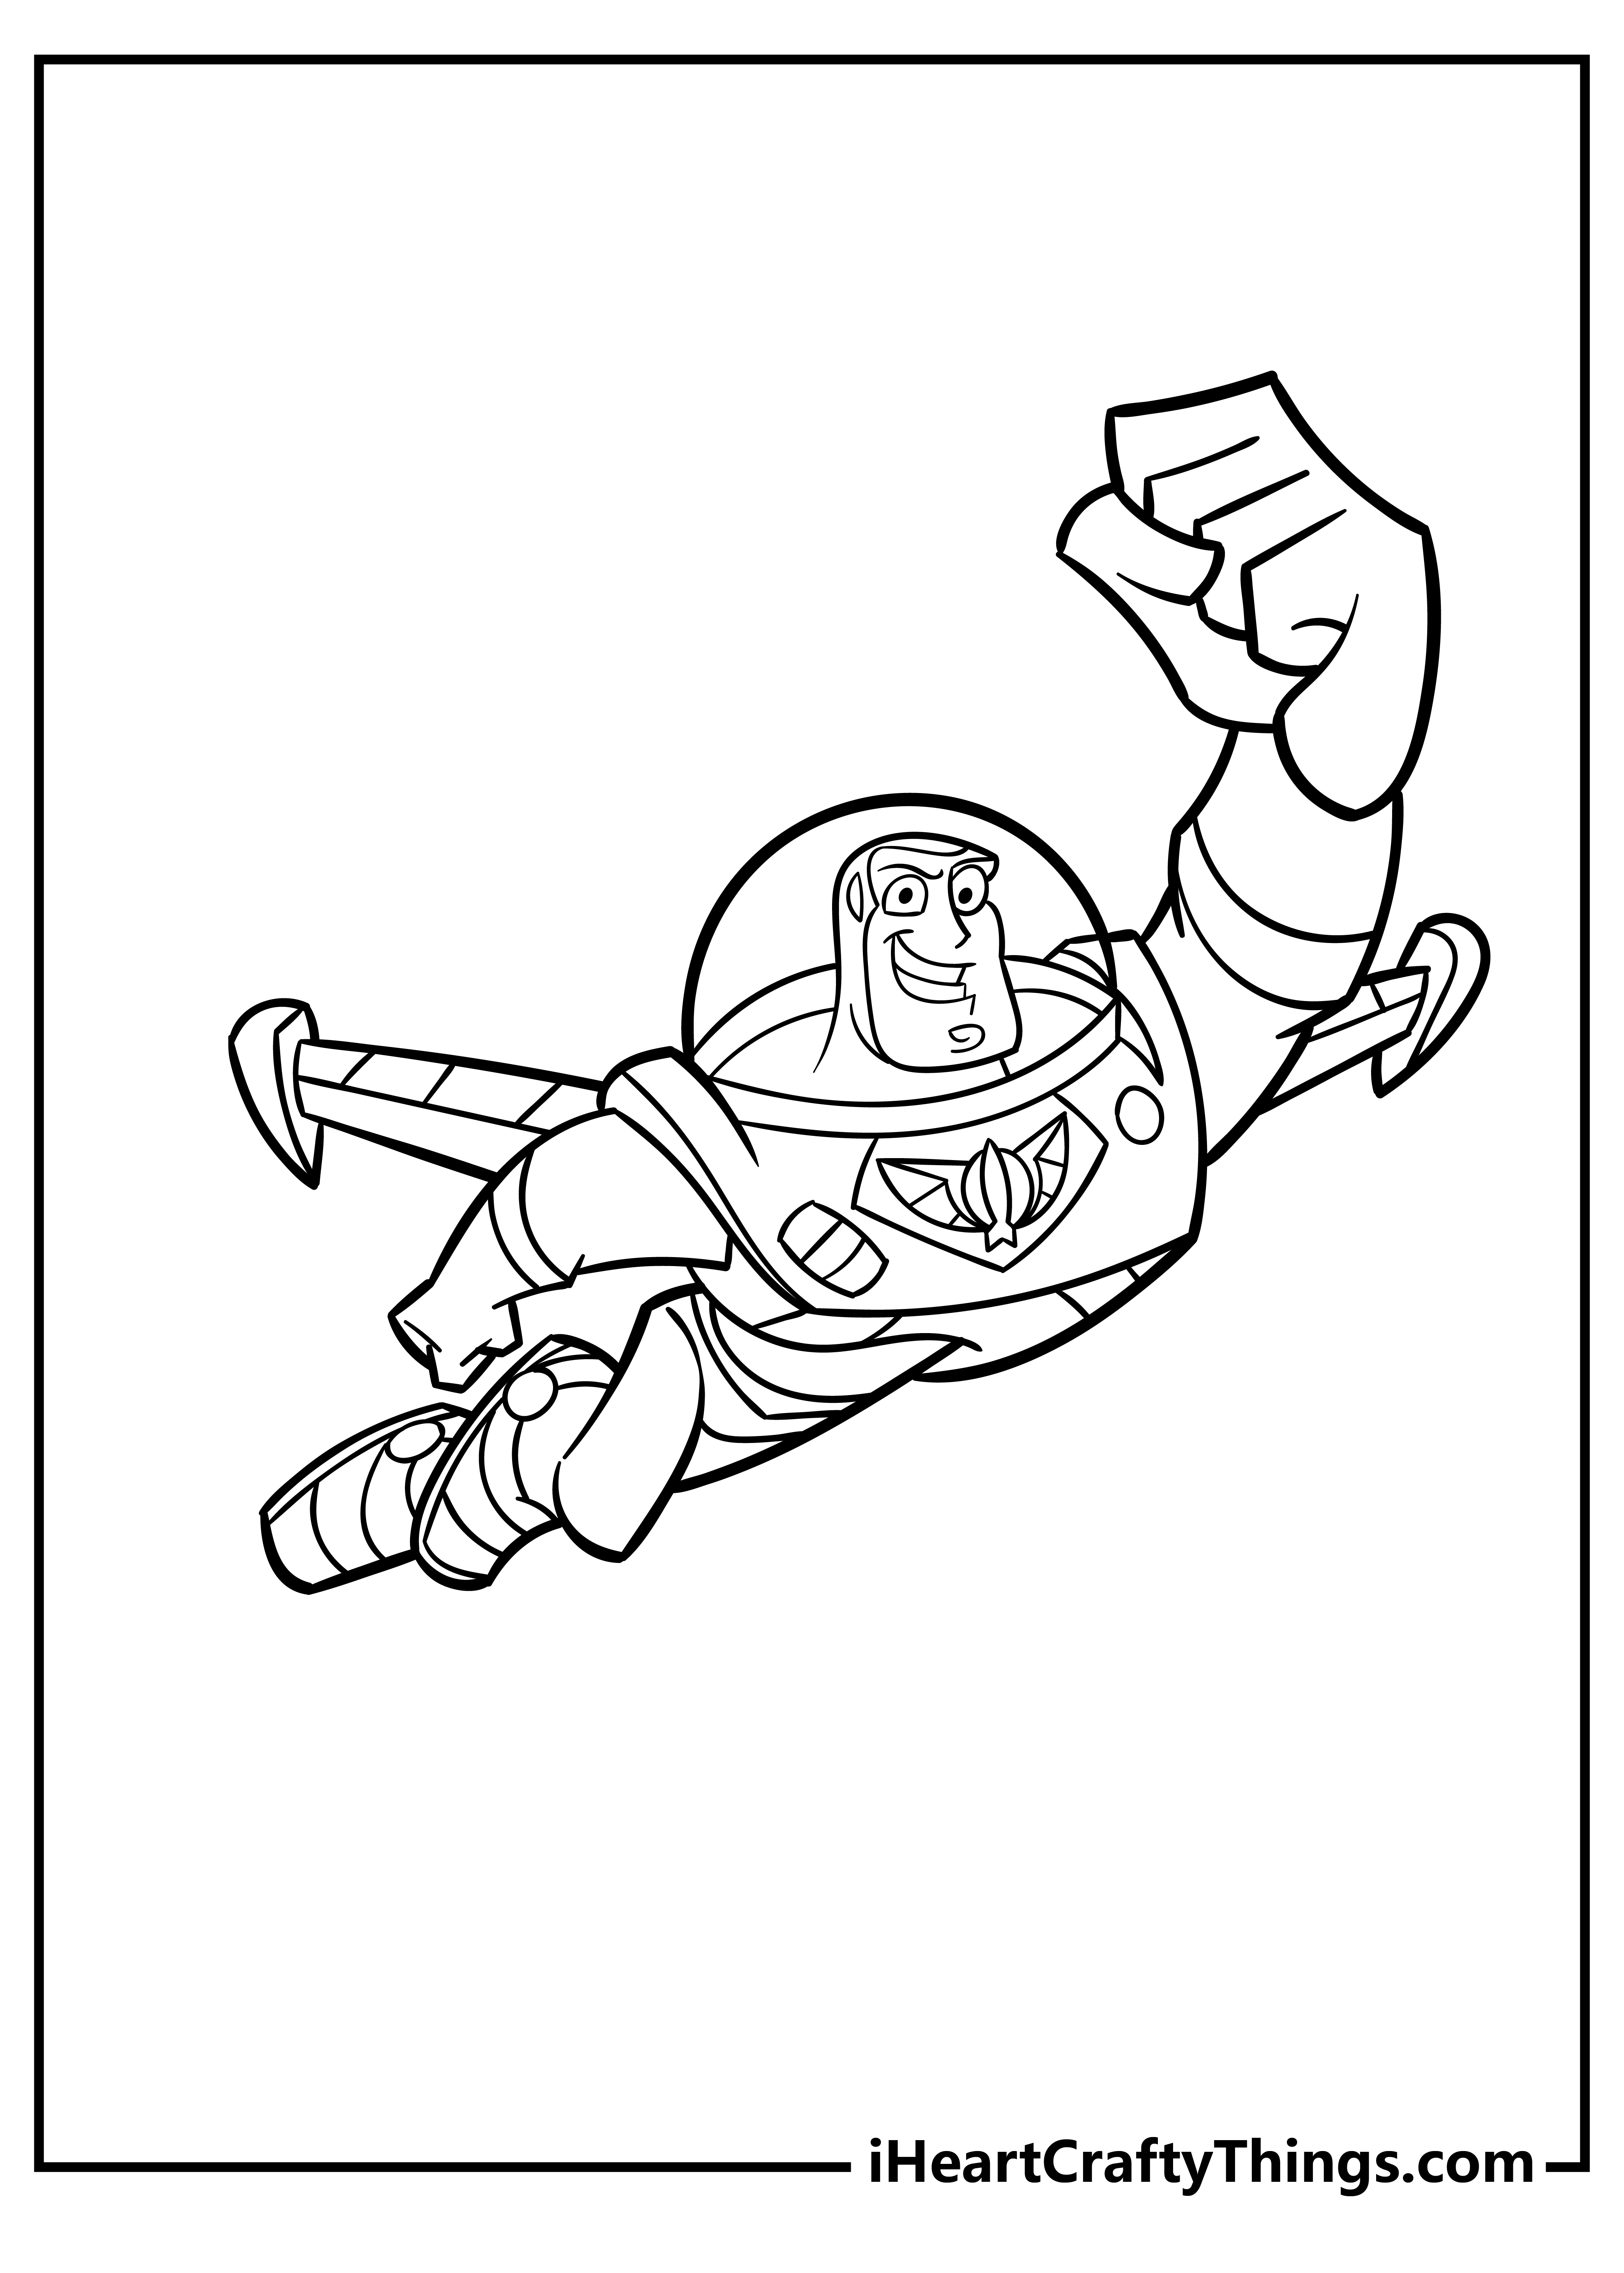 Buzz Lightyear Cartoon Coloring Book for kids free printable